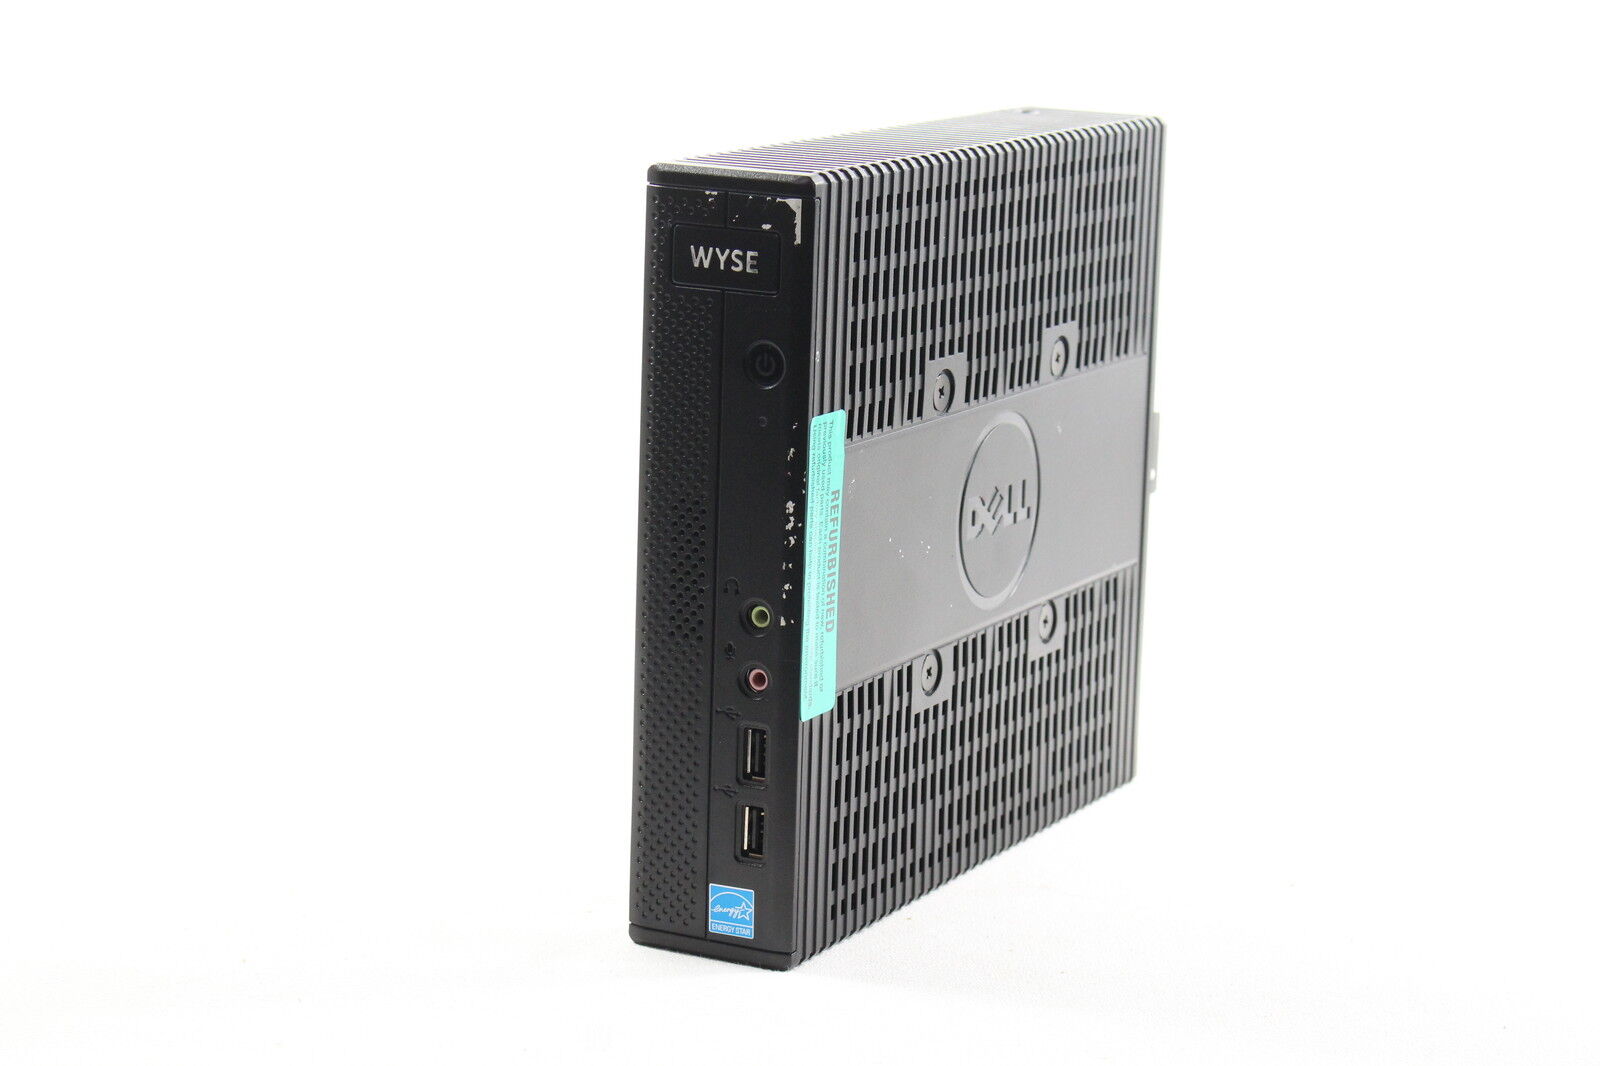 Genuine Dell Wyse Zx0 7010 Thin Client Dual Core 1.67GHz 6KC5H WIFI Device Only